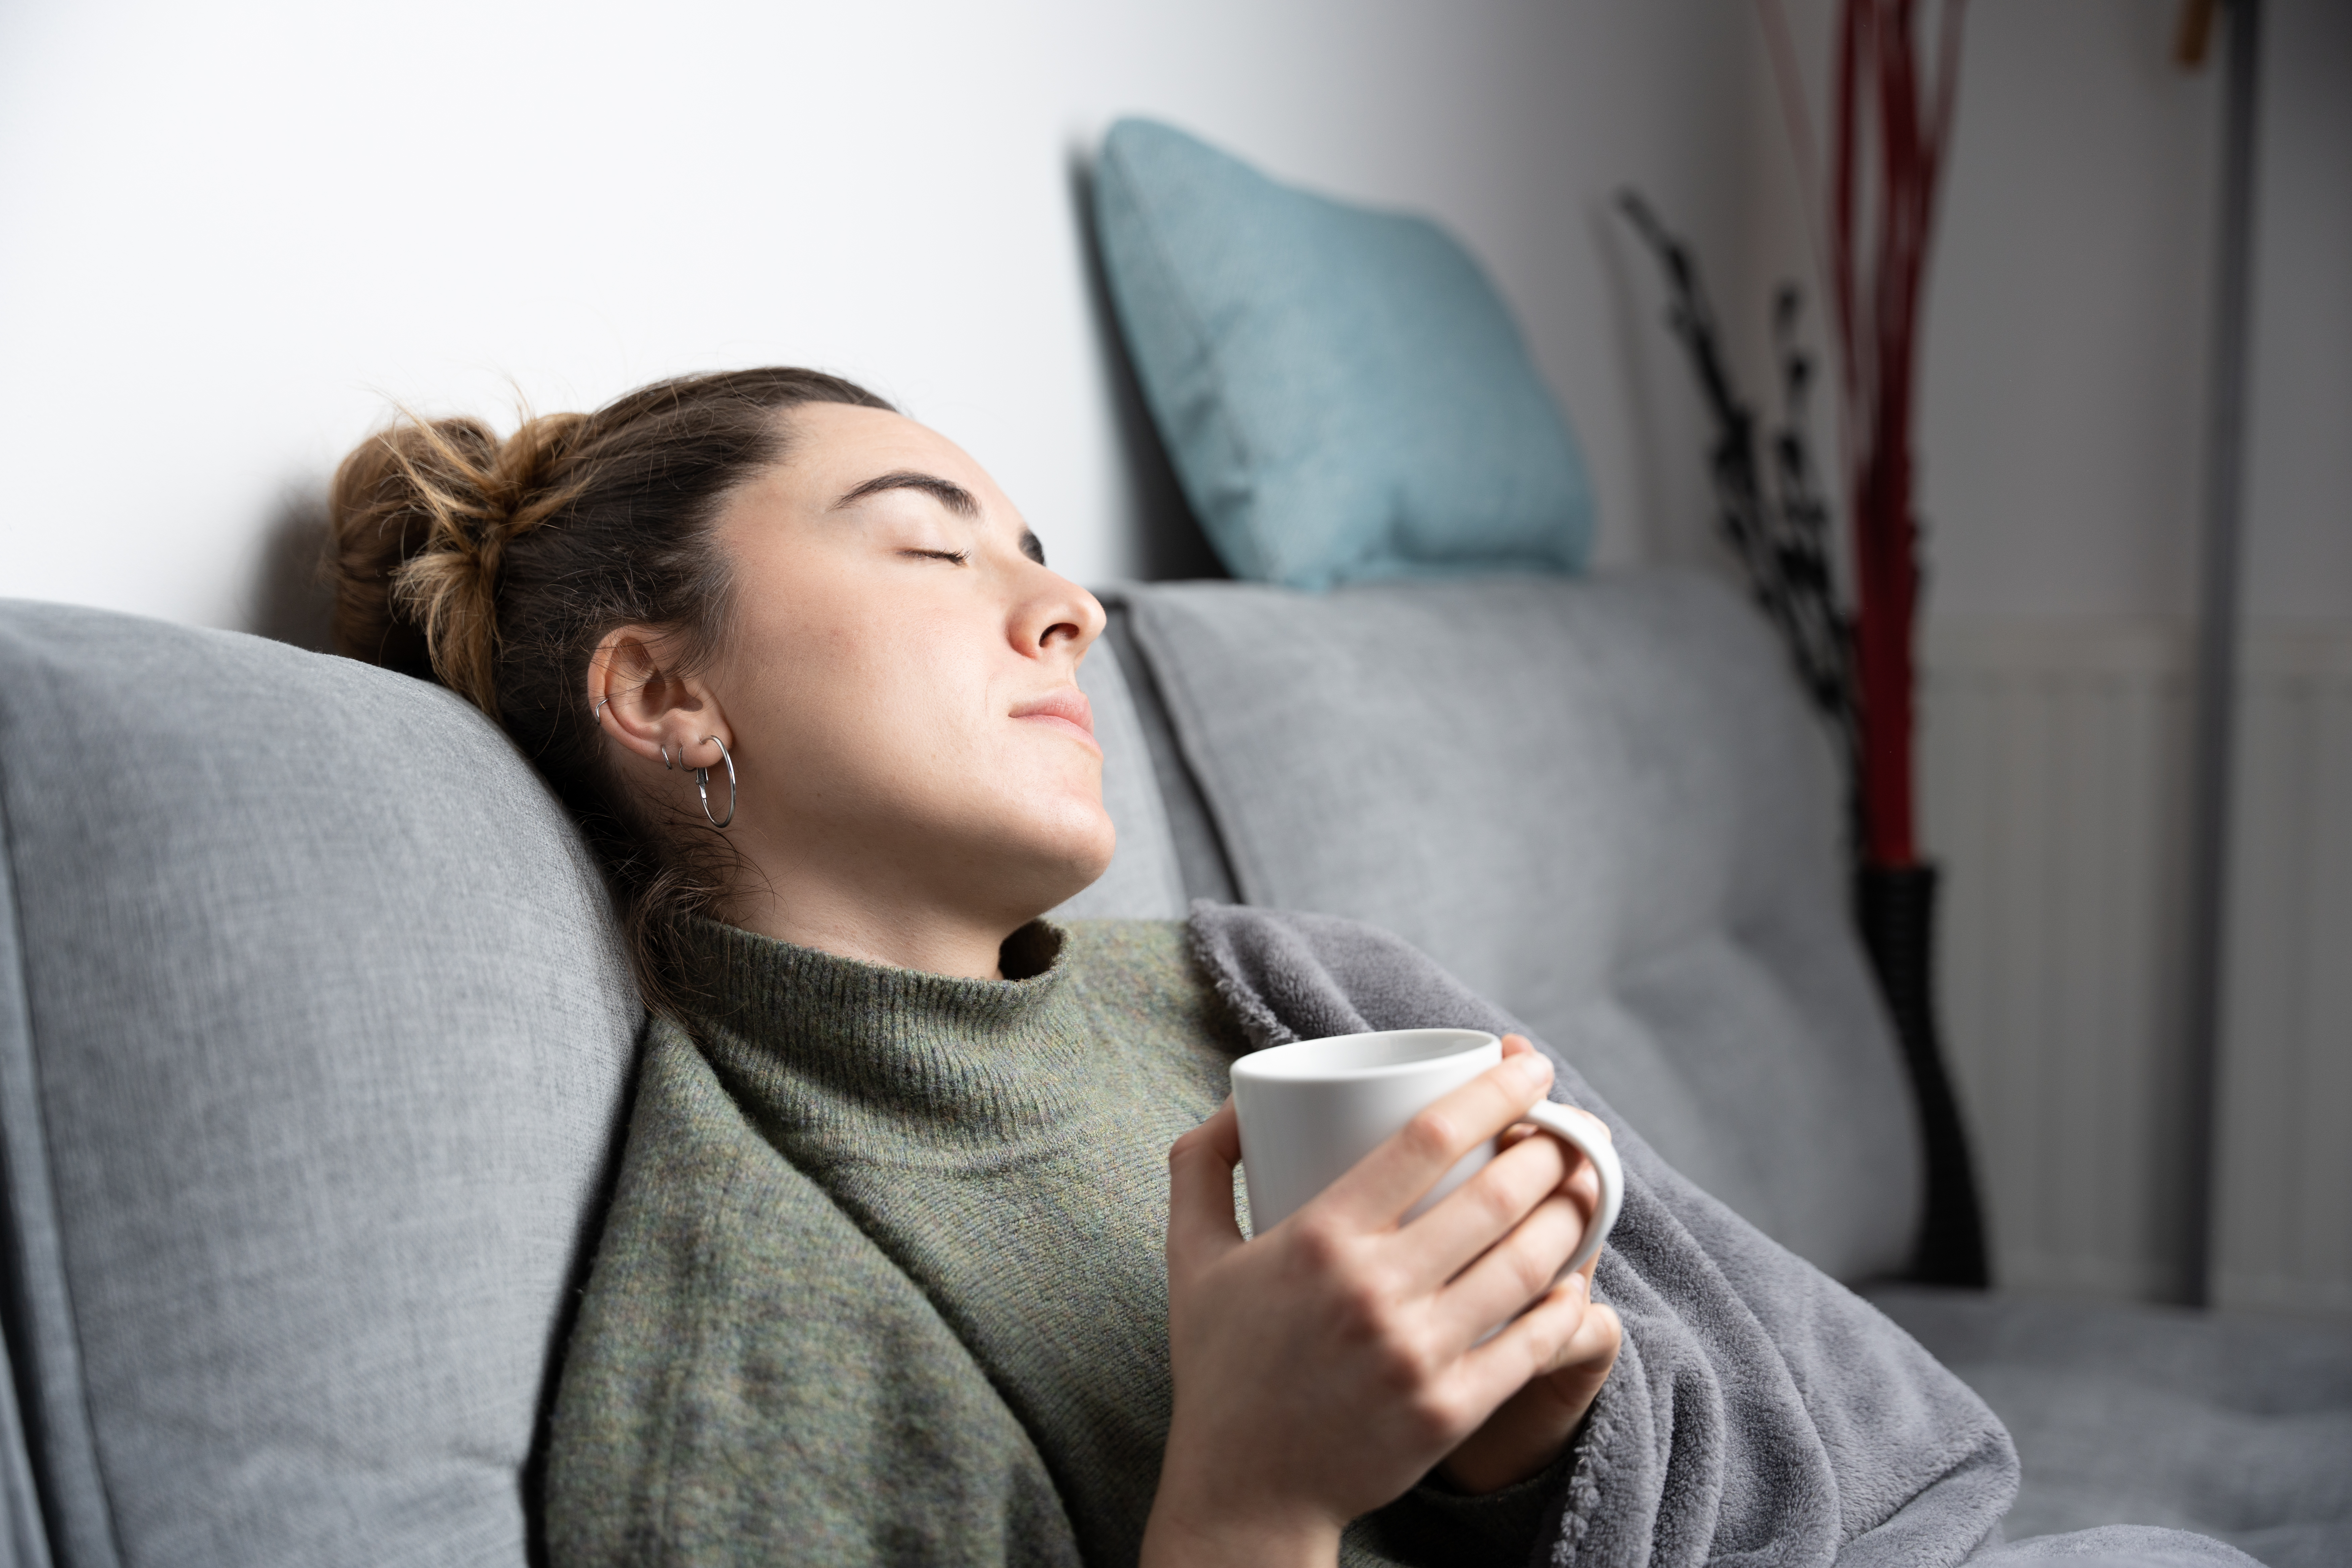 A young tired white woman resting on couch and holding a cup of coffee